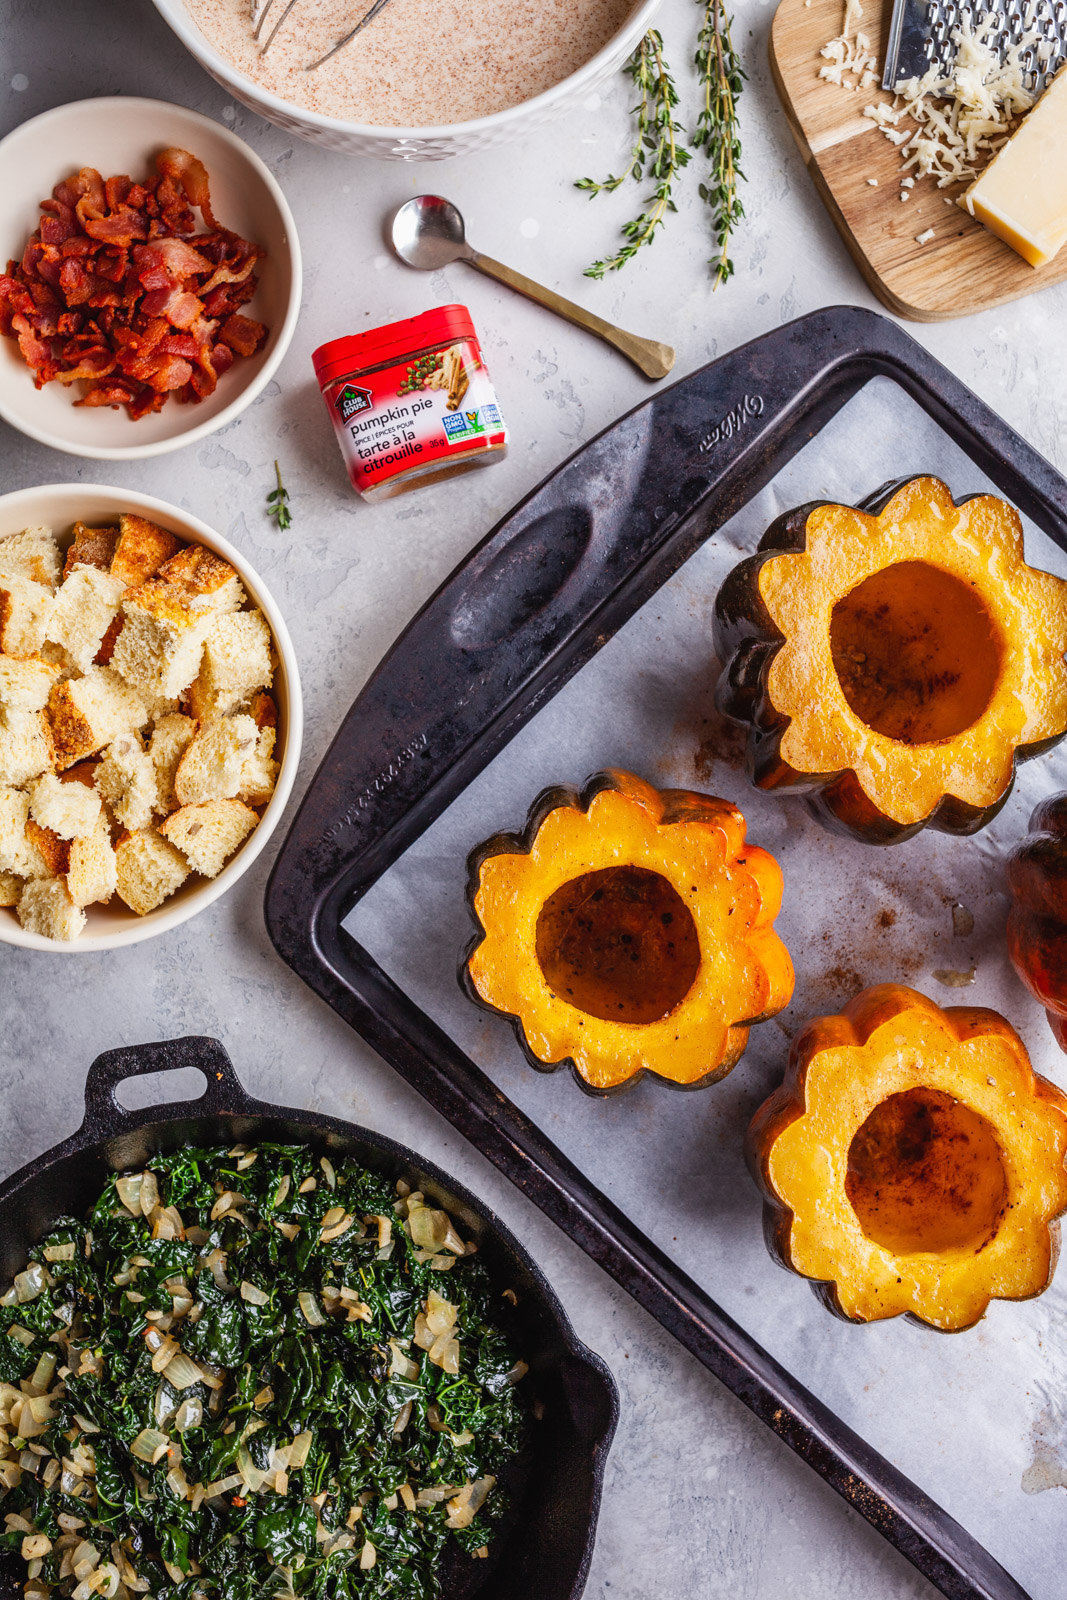 Stuffed Acorn Squash With Bacon And Kale Bread Pudding